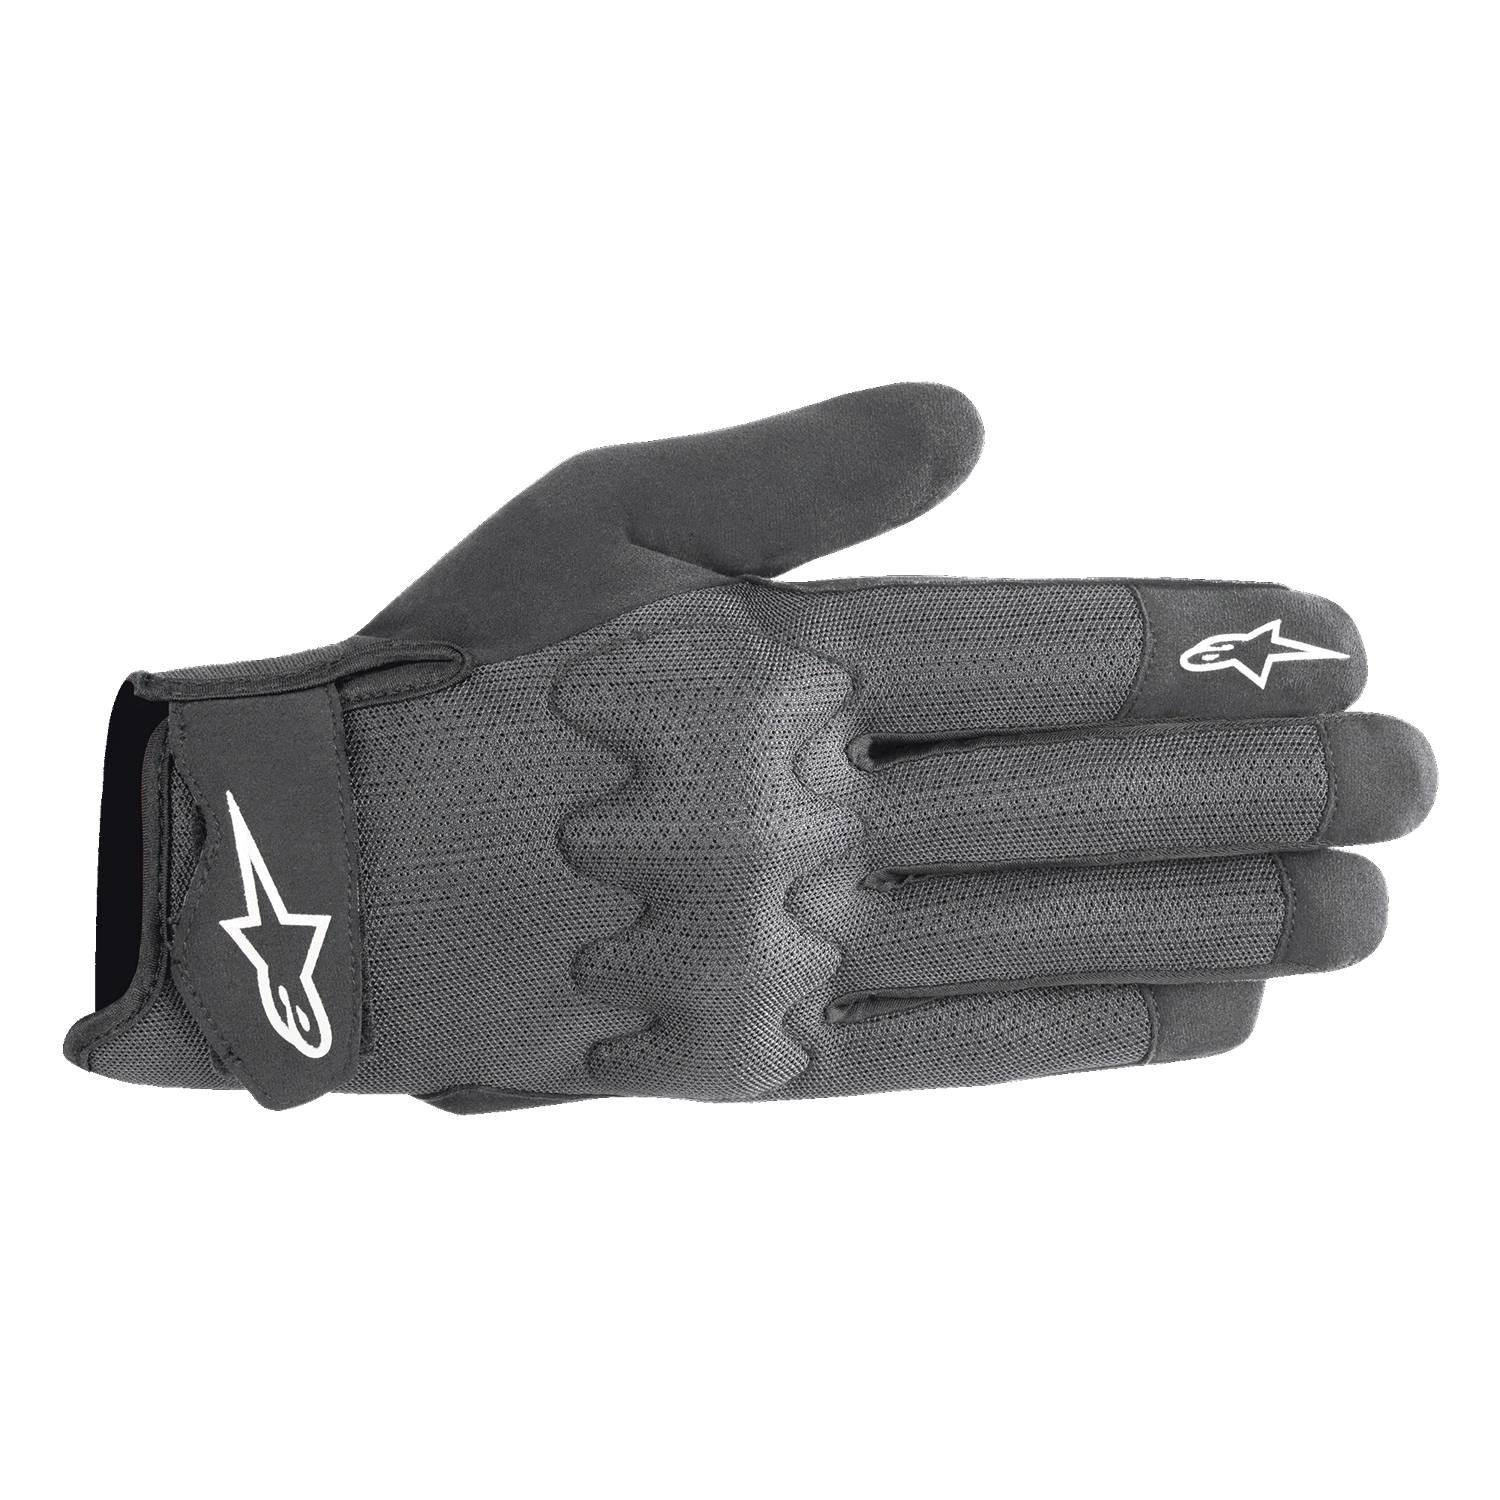 Image of Alpinestars Stated Air Gloves Black Silver Size 2XL EN